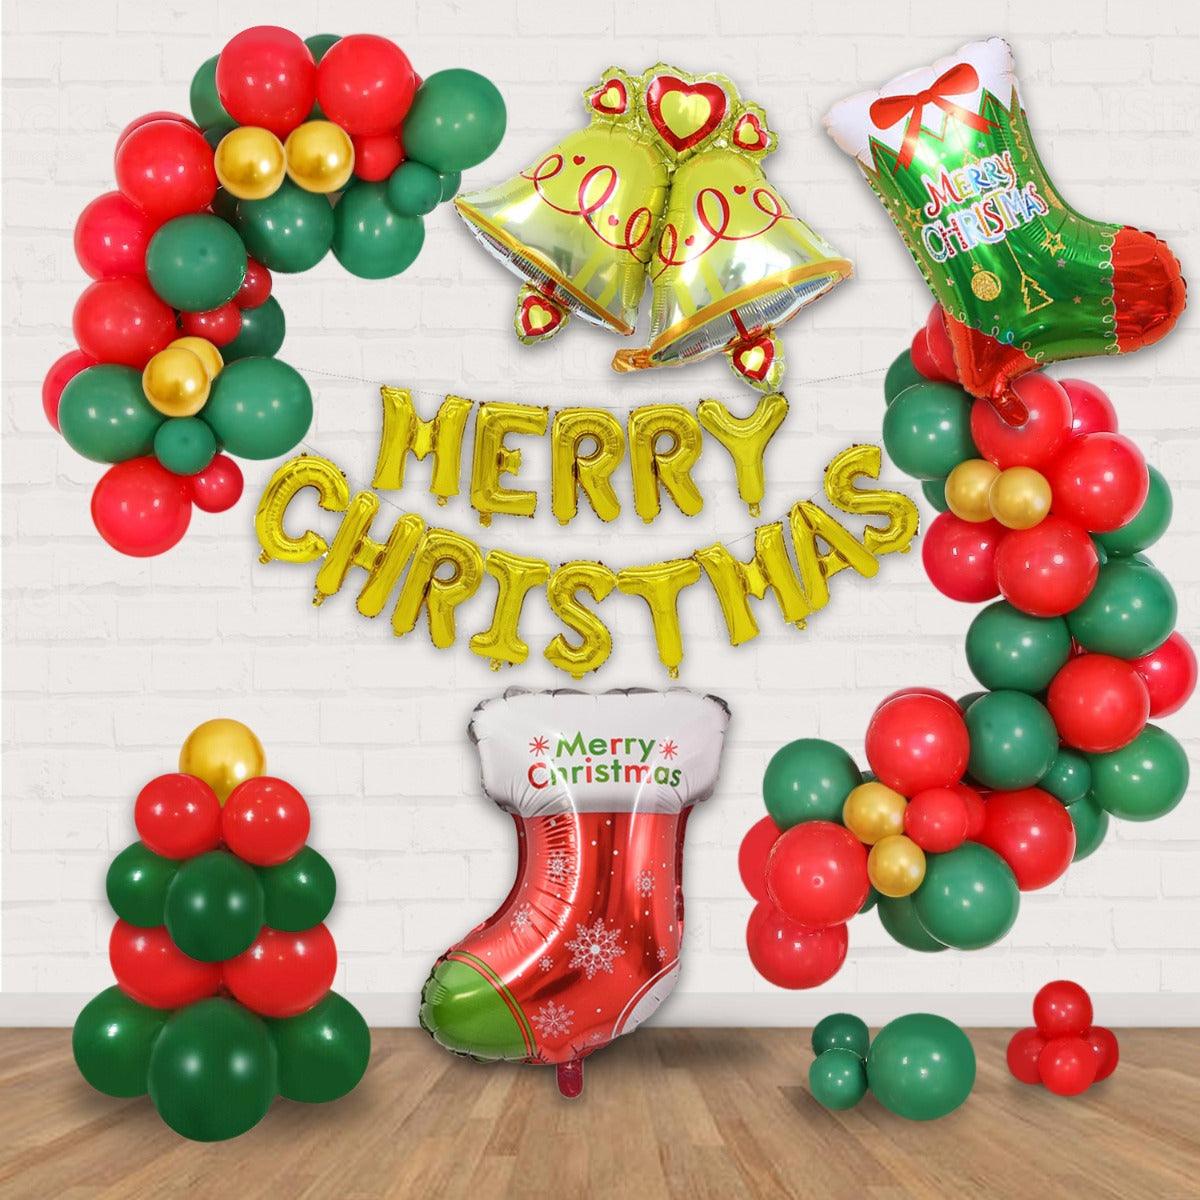 PartyCorp Merry Christmas Decoration Kit Combo 64 Pcs - Dark Green, Red Balloons, Gold Chrome Balloon, Gold Merry Christmas Foil Banner, Large Bell Foil Balloon, 2 Socks Foil Balloon